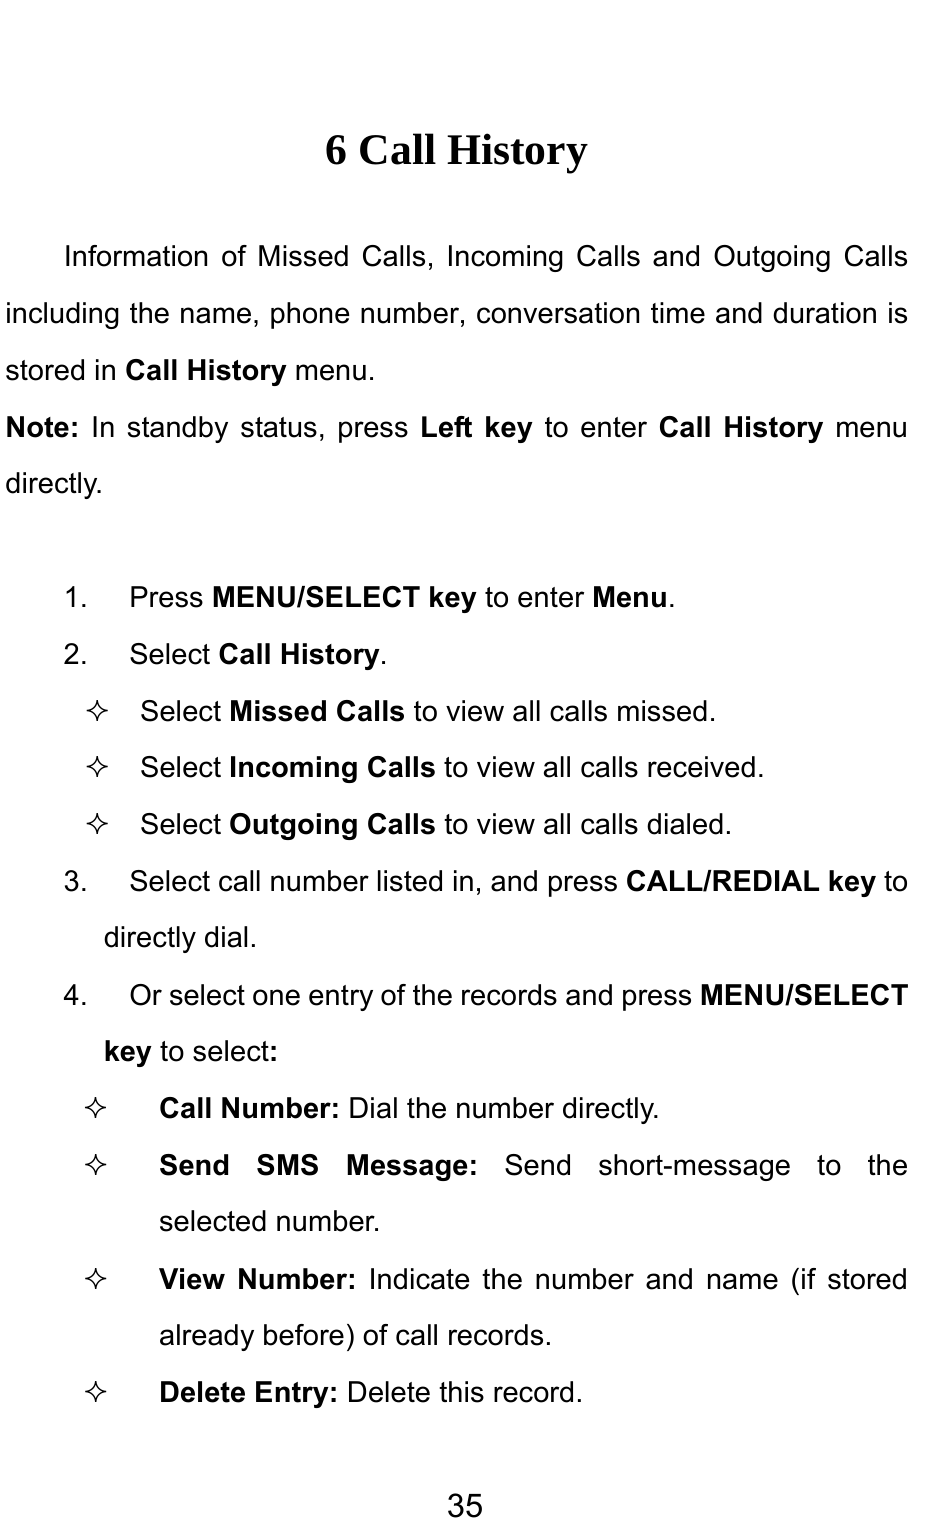                                     356 Call History Information of Missed Calls, Incoming Calls and Outgoing Calls including the name, phone number, conversation time and duration is stored in Call History menu. Note: In standby status, press Left key to enter Call History menu directly.   1. Press MENU/SELECT key to enter Menu.  2. Select Call History.  Select Missed Calls to view all calls missed.   Select Incoming Calls to view all calls received.  Select Outgoing Calls to view all calls dialed. 3.  Select call number listed in, and press CALL/REDIAL key to directly dial. 4.  Or select one entry of the records and press MENU/SELECT key to select:  Call Number: Dial the number directly.  Send SMS Message: Send short-message to the selected number.  View Number: Indicate the number and name (if stored already before) of call records.  Delete Entry: Delete this record. 